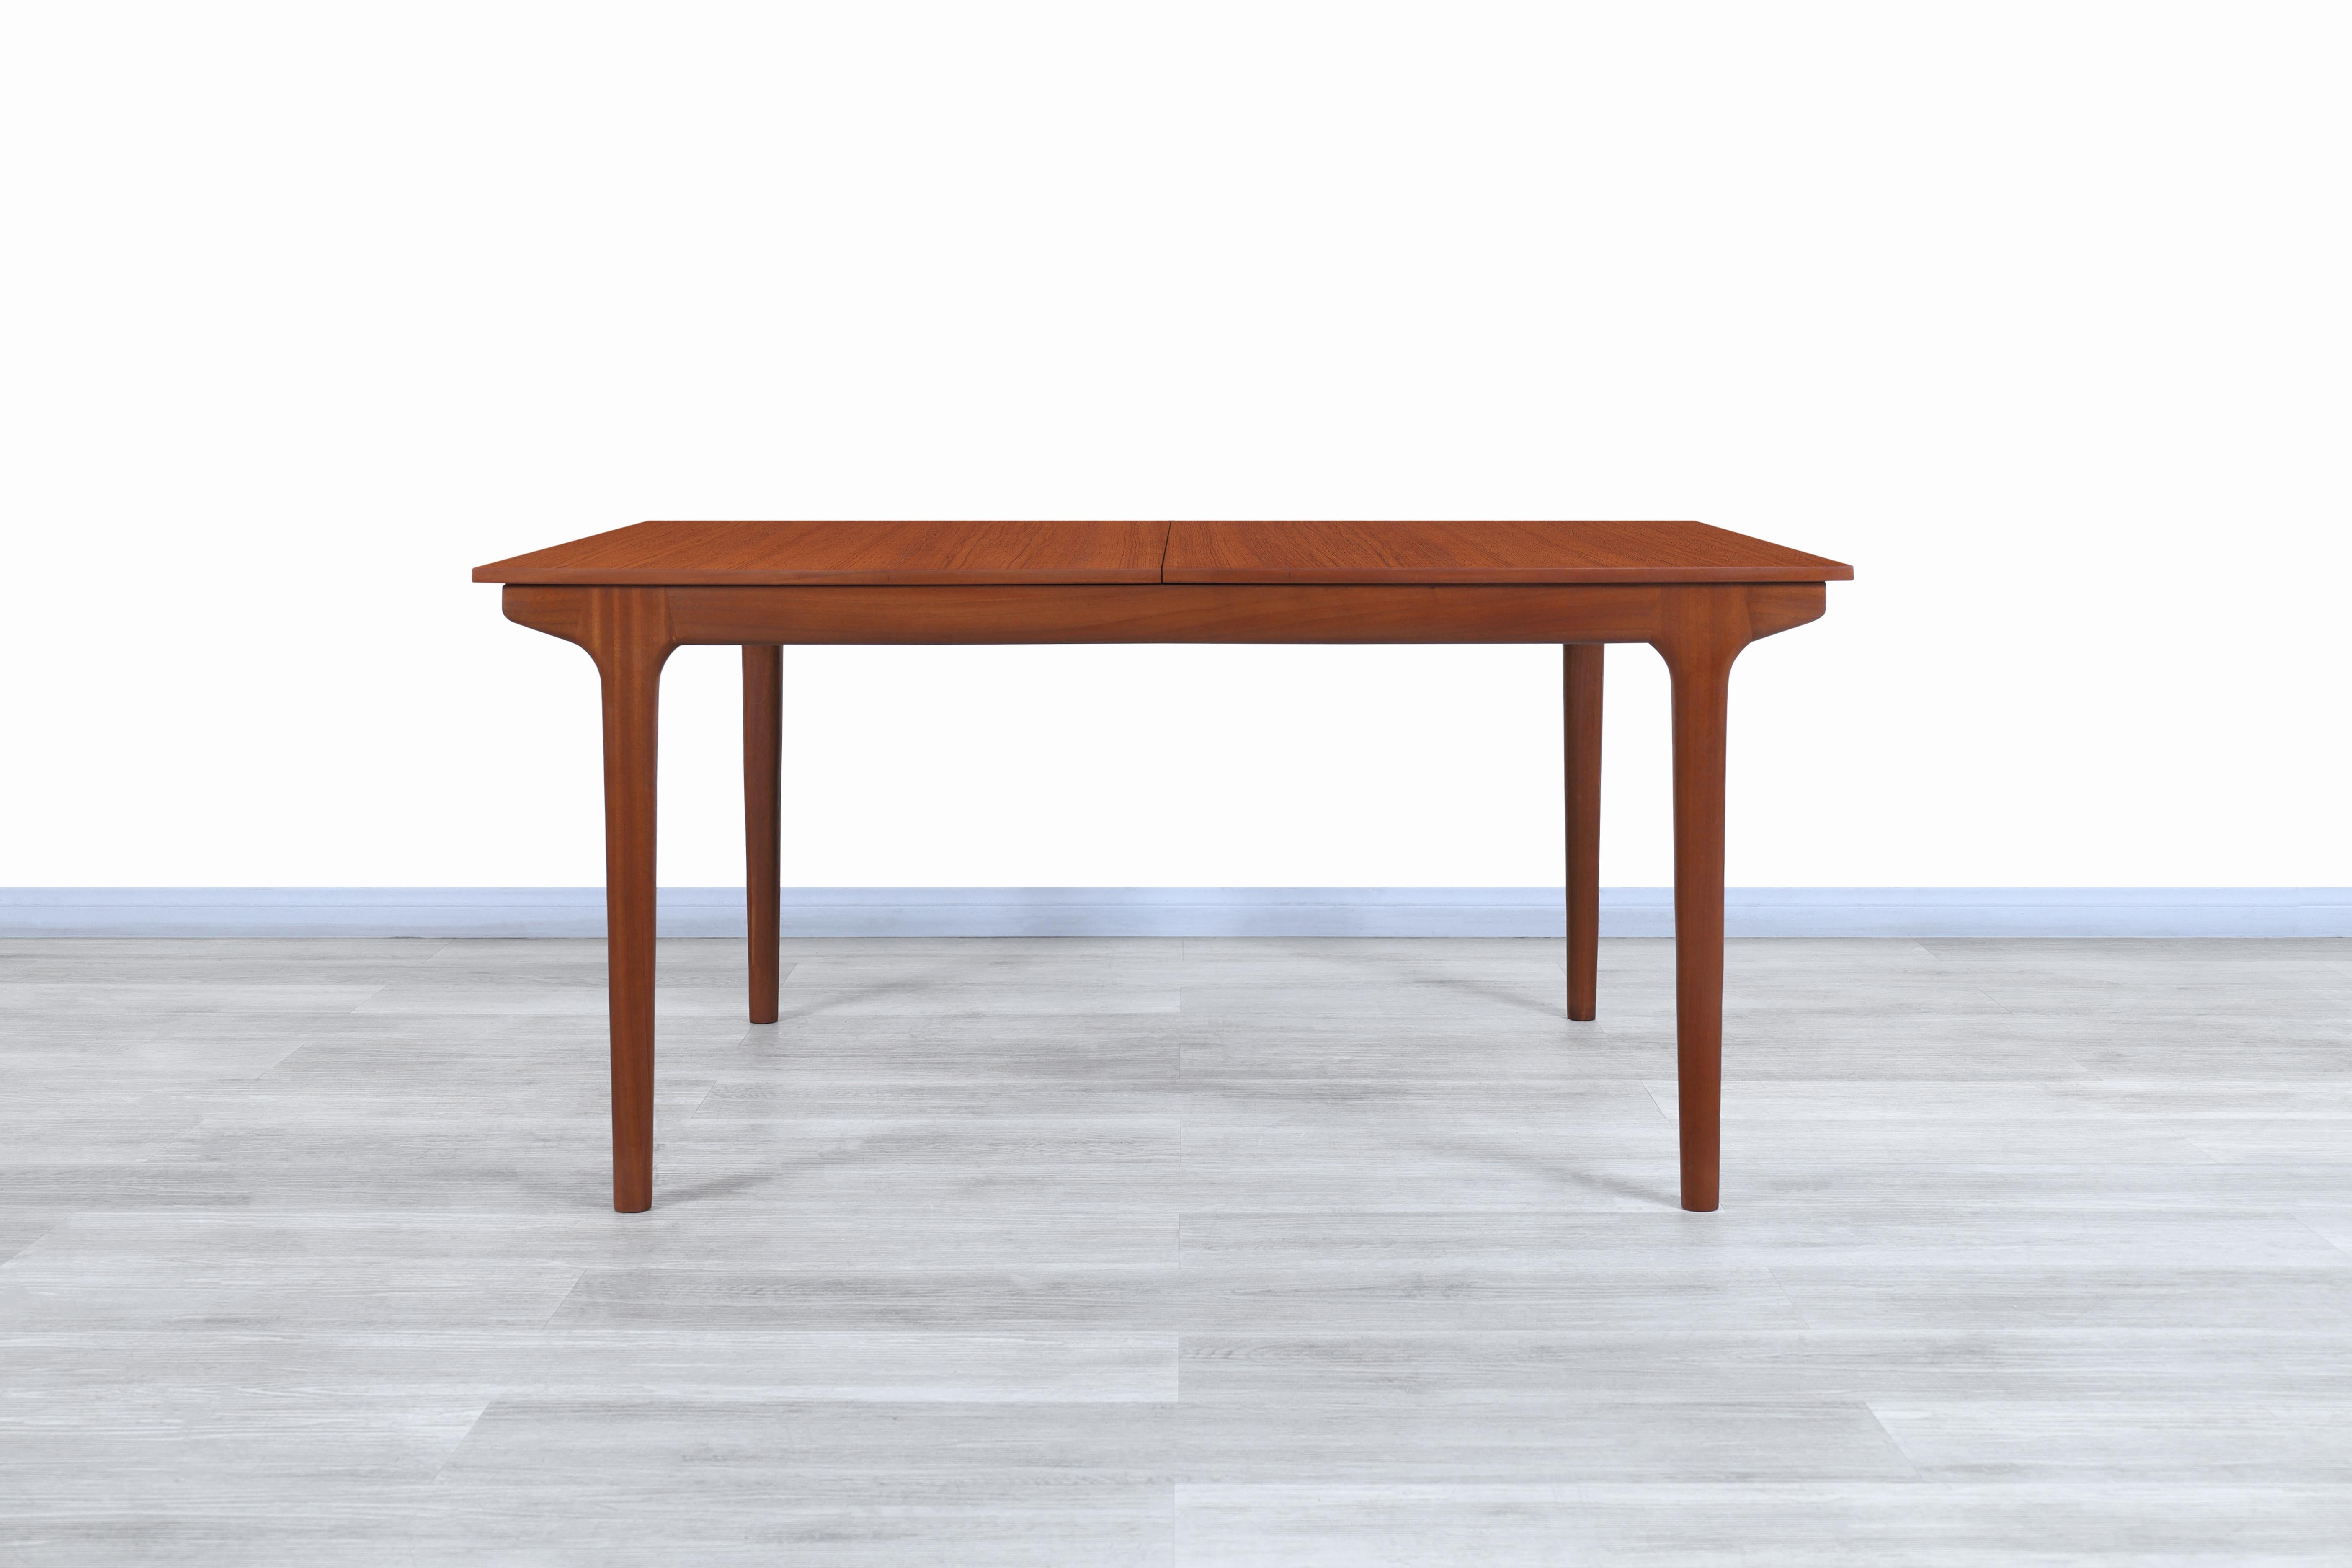 Amazing midcentury expanding teak dining table designed by Tom Robertson for McIntosh in the United Kingdom, circa 1960s. This table has an avant-garde design that focuses on the elegance of details and the proper selection of materials used for its